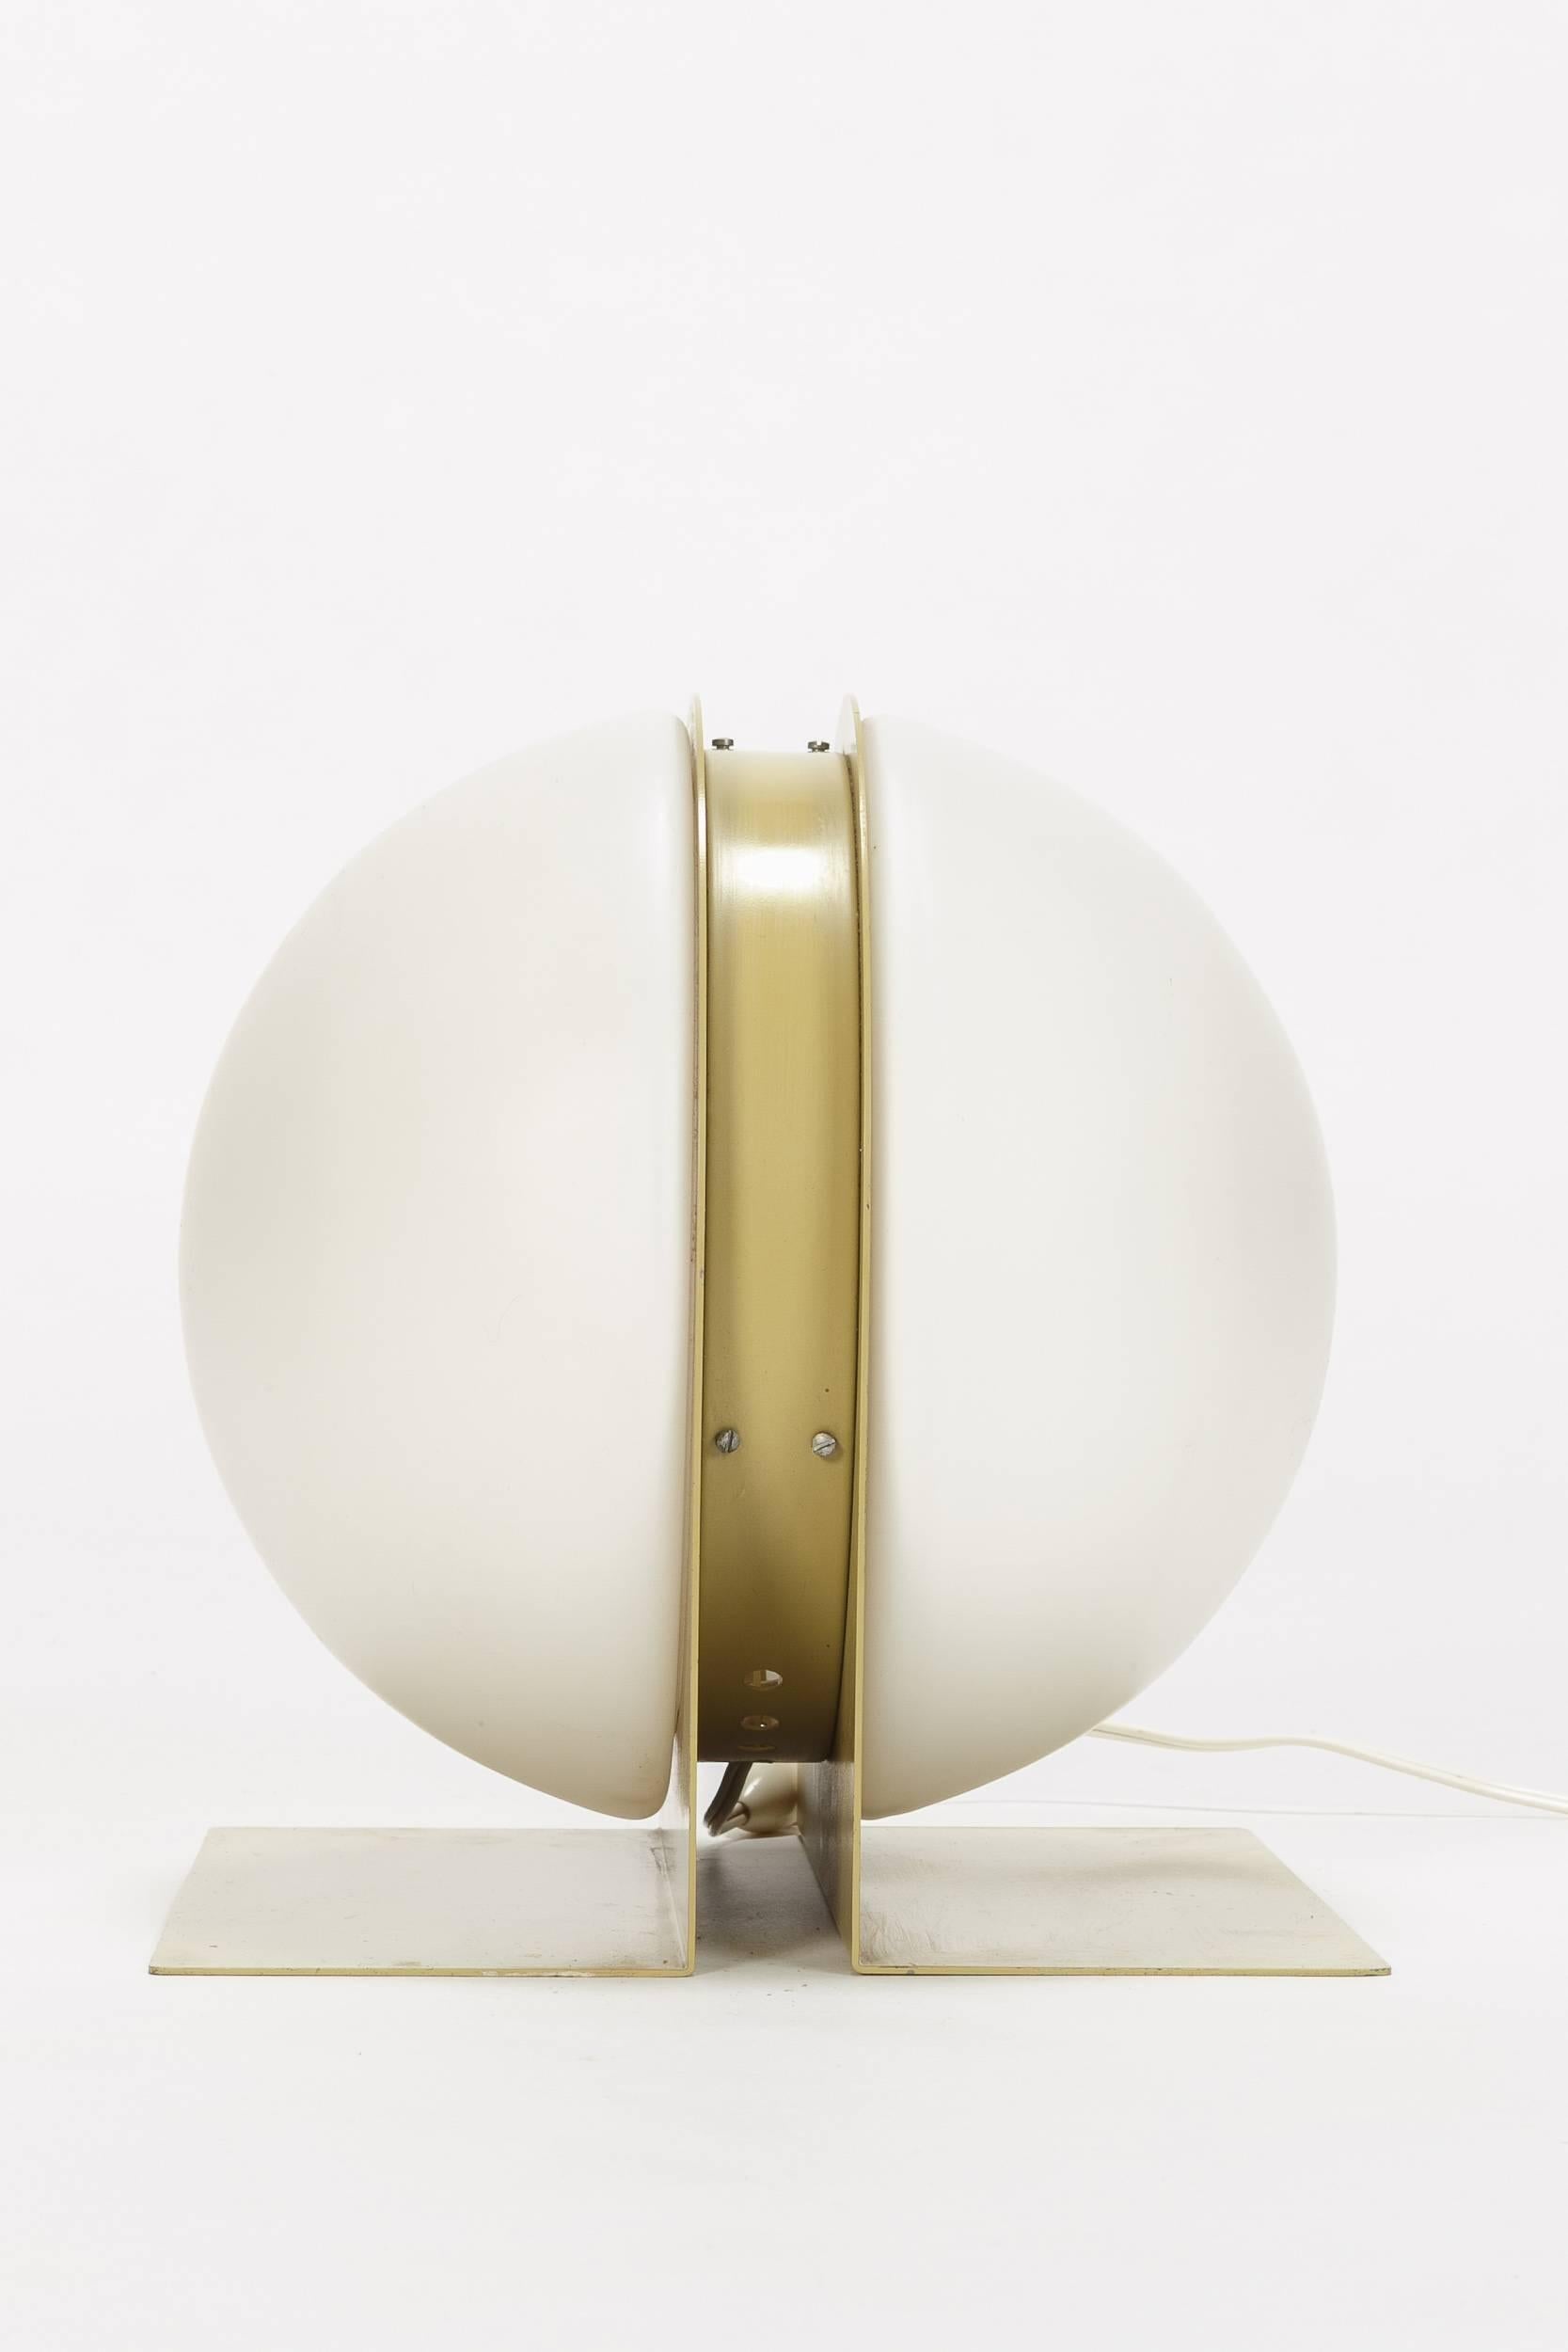 Very rare Ben Swildens table lamp designed for the French manufacturer Verre Lumière in 1970. The offered model 10445 here was designed by artistic director Ben Swildens and is made of satinated opaline glass and lacquered metal. It’s an exemplar